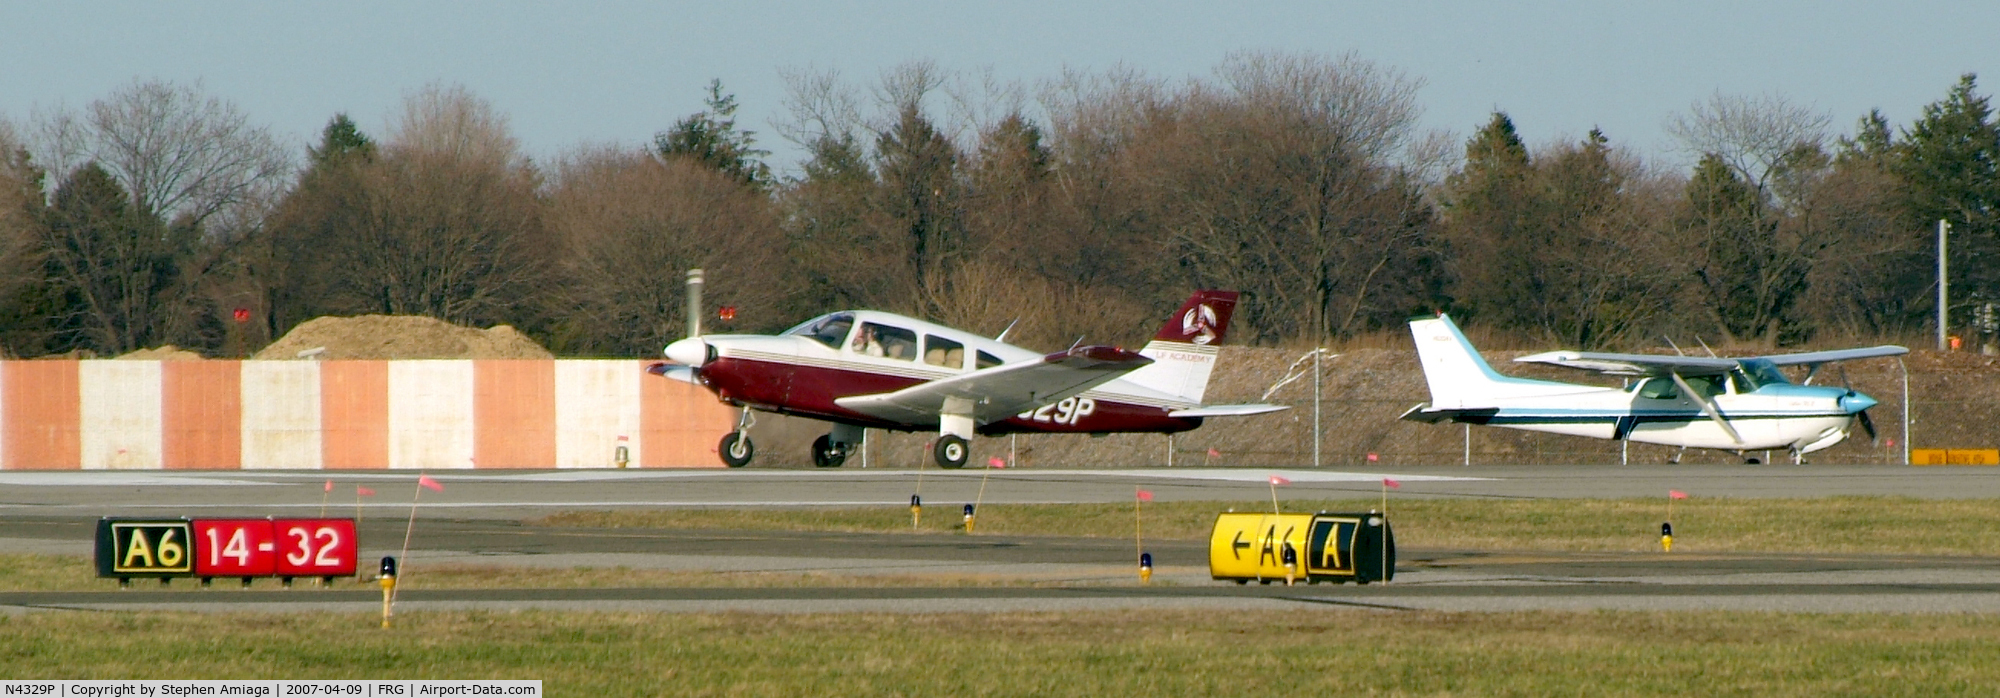 N4329P, 1983 Piper PA-28-181 C/N 28-8490022, Archer in position and holding, 32